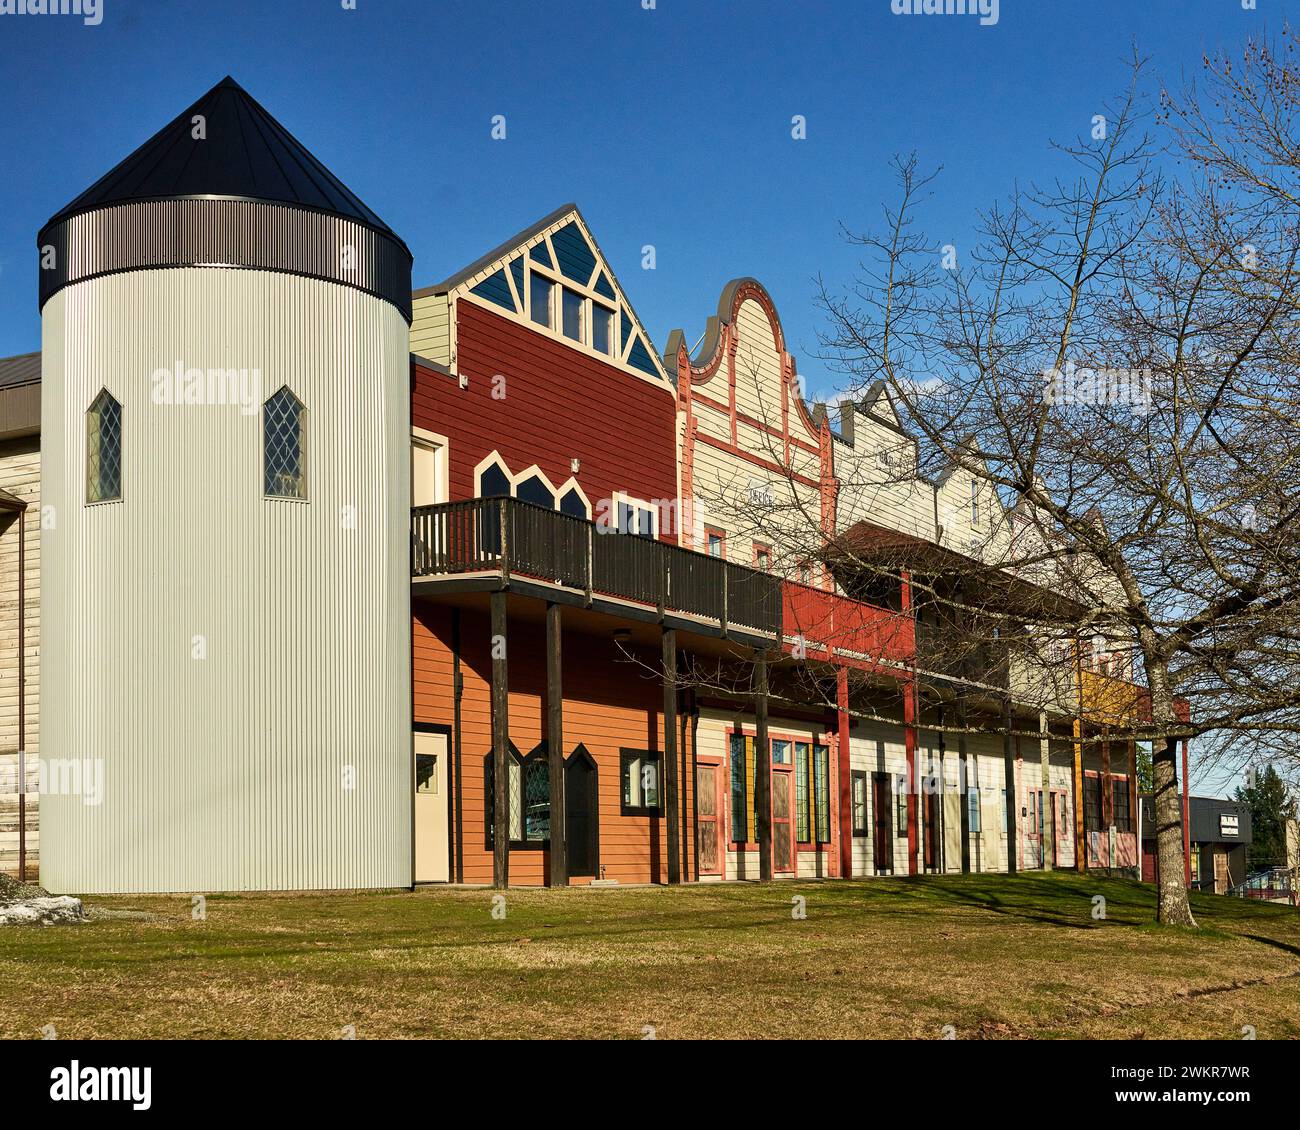 A scenic view of the colorful facade of a museum in a village with a rich coal mining history in Cumberland Museum Stock Photo